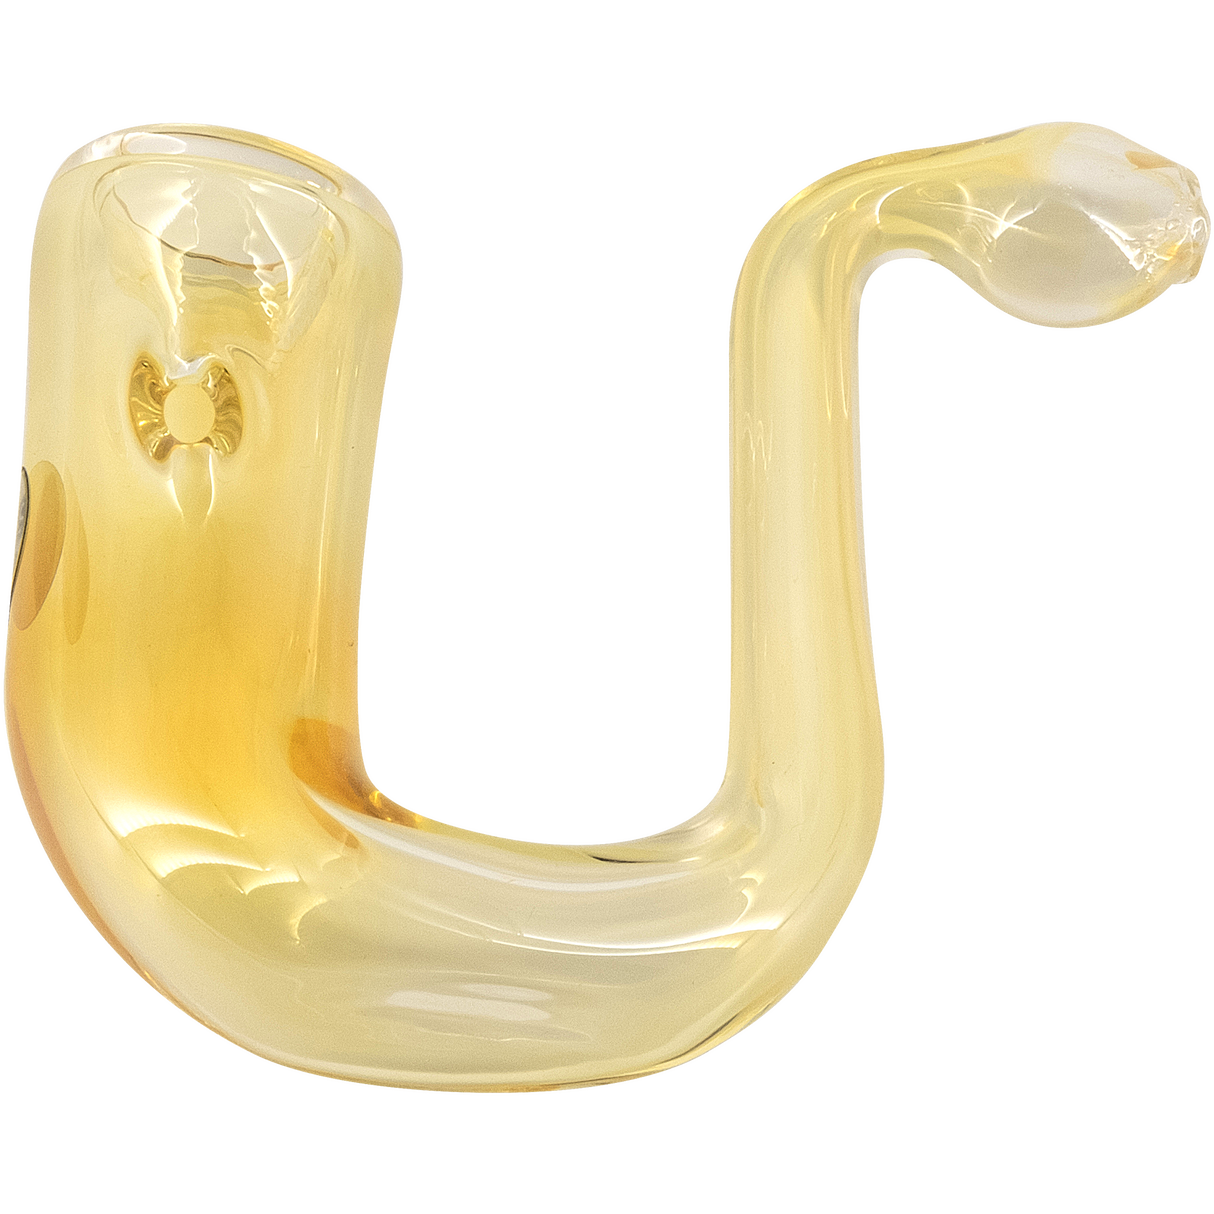 LA Pipes "Calabash" Fumed Glass Sherlock Hand Pipe, Color Changing Design, USA Made